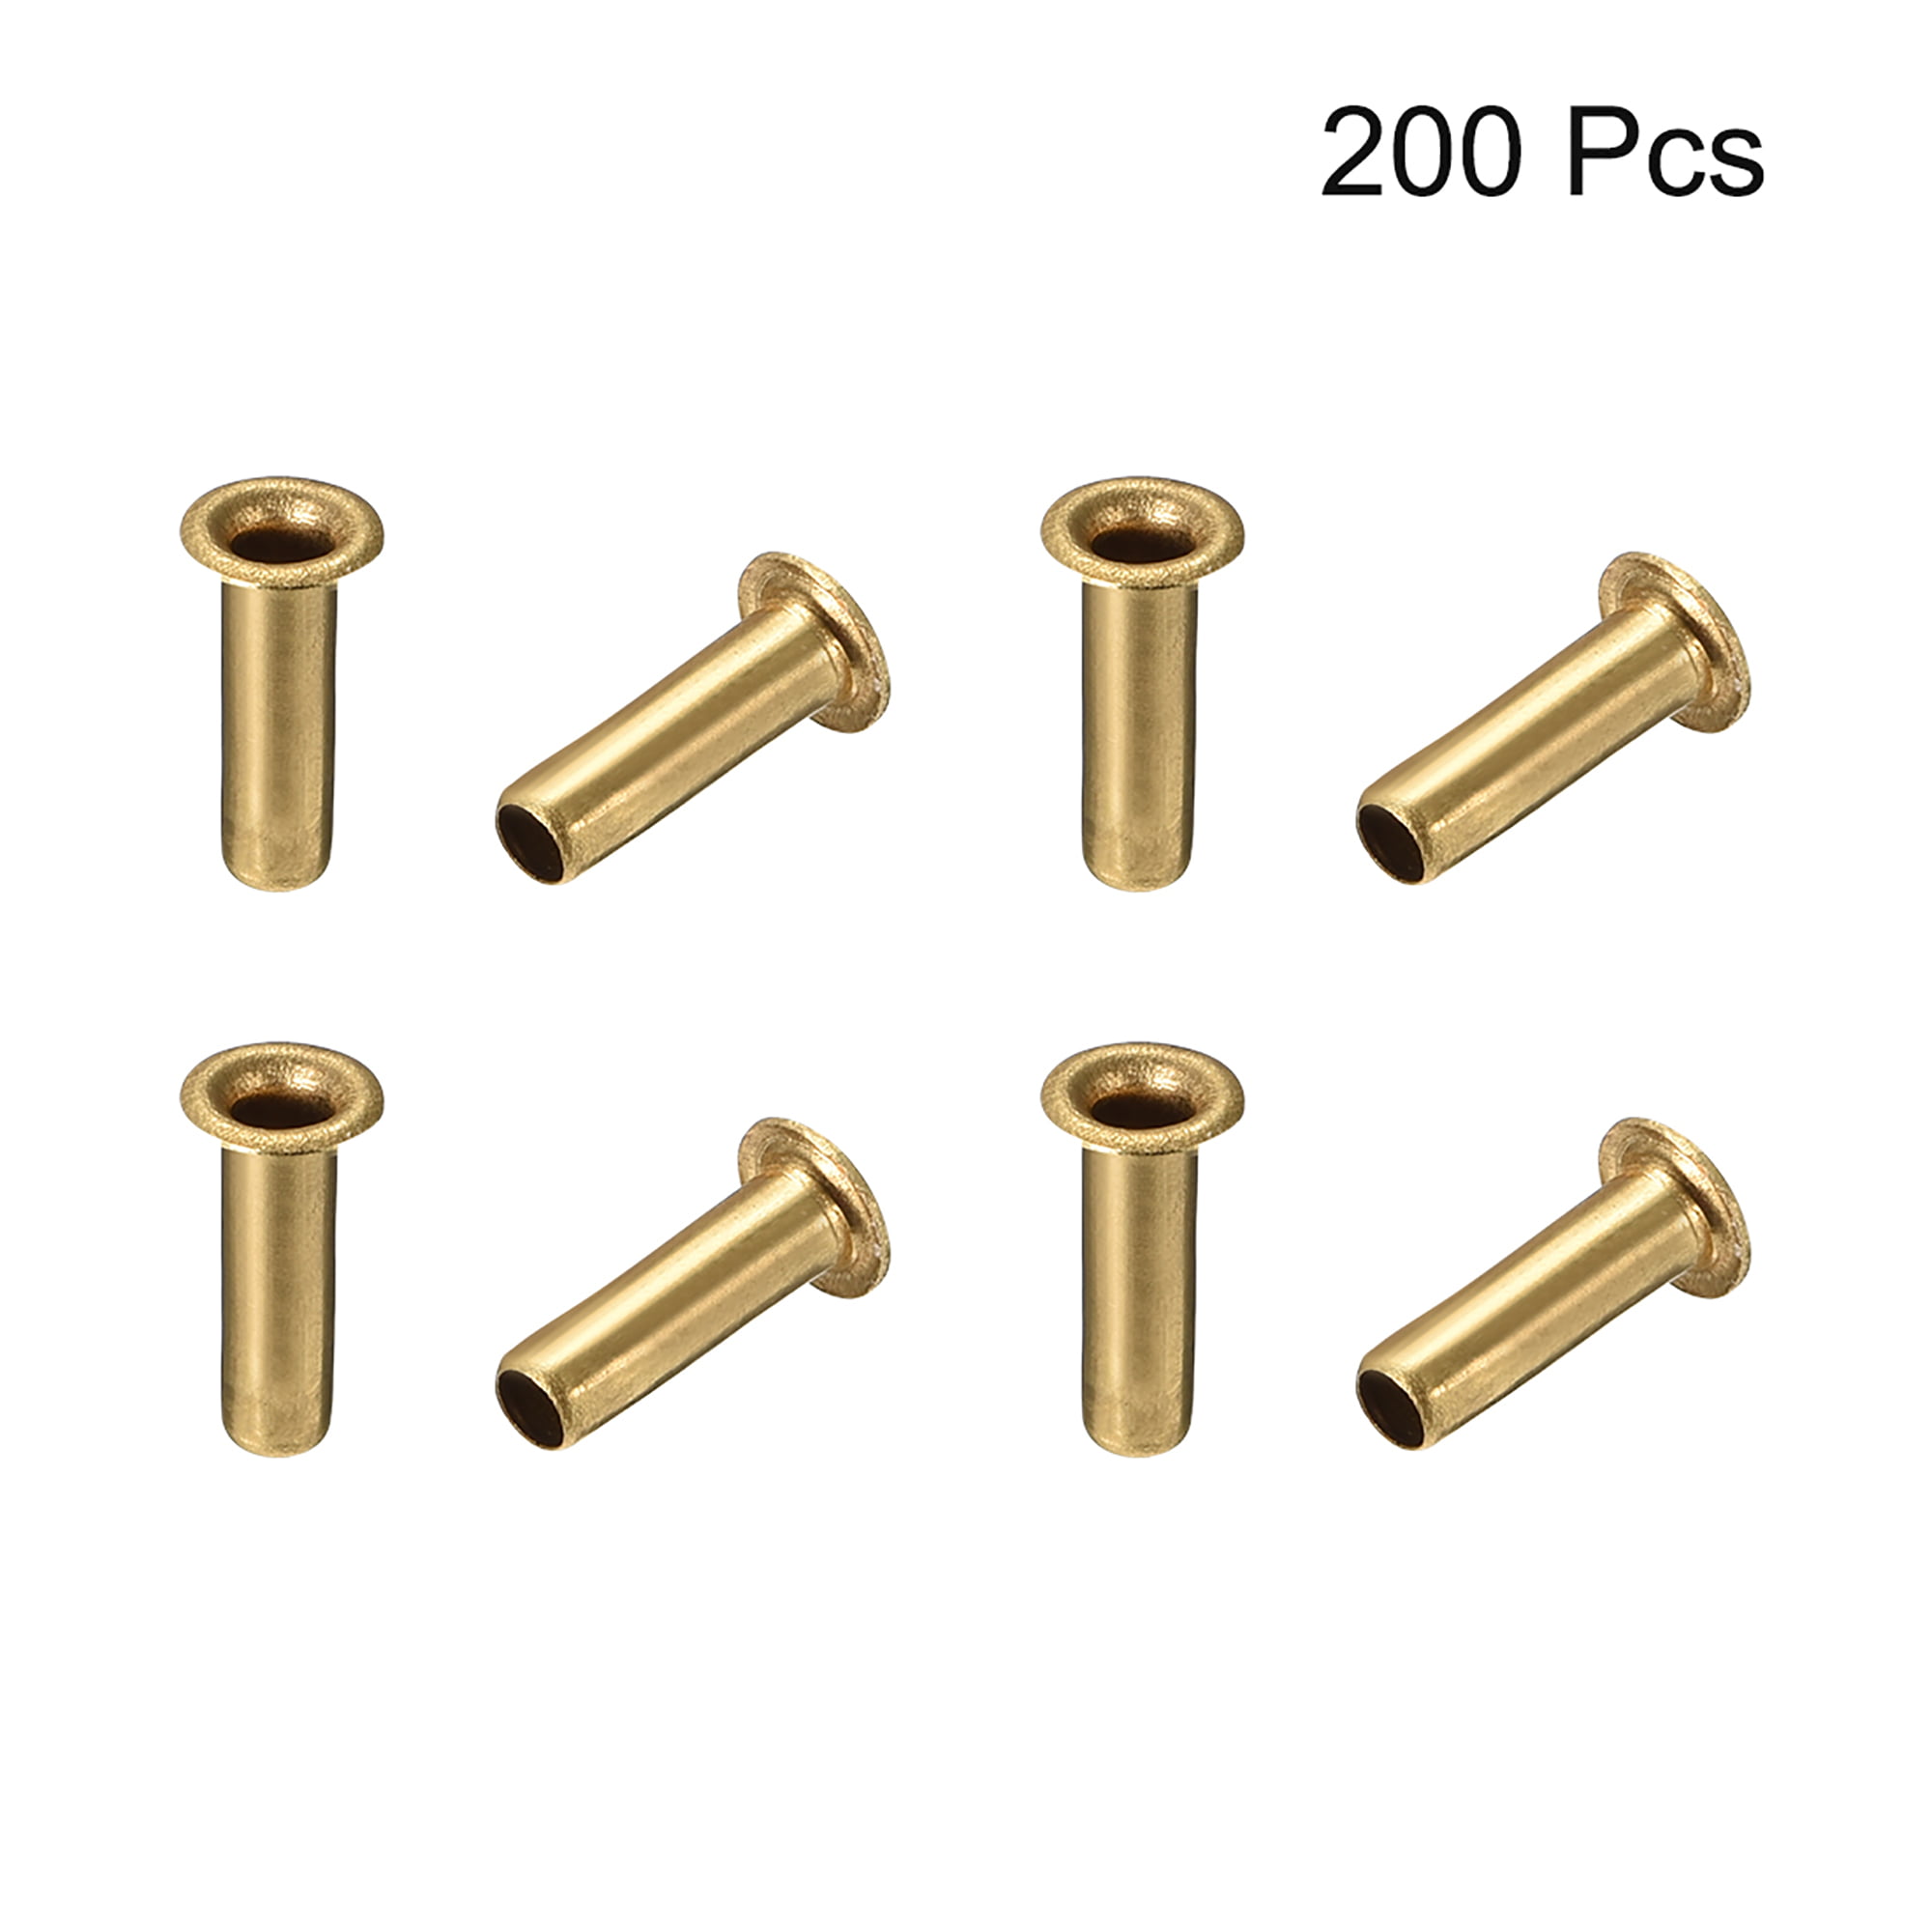 200Pcs Yinpecly Hollow Rivet M3 x 10 Through Hole Copper Hollow Rivets Grommets Double-Sided Circuit Board PCB for Daily Living Equipment Mechanical Engineering 